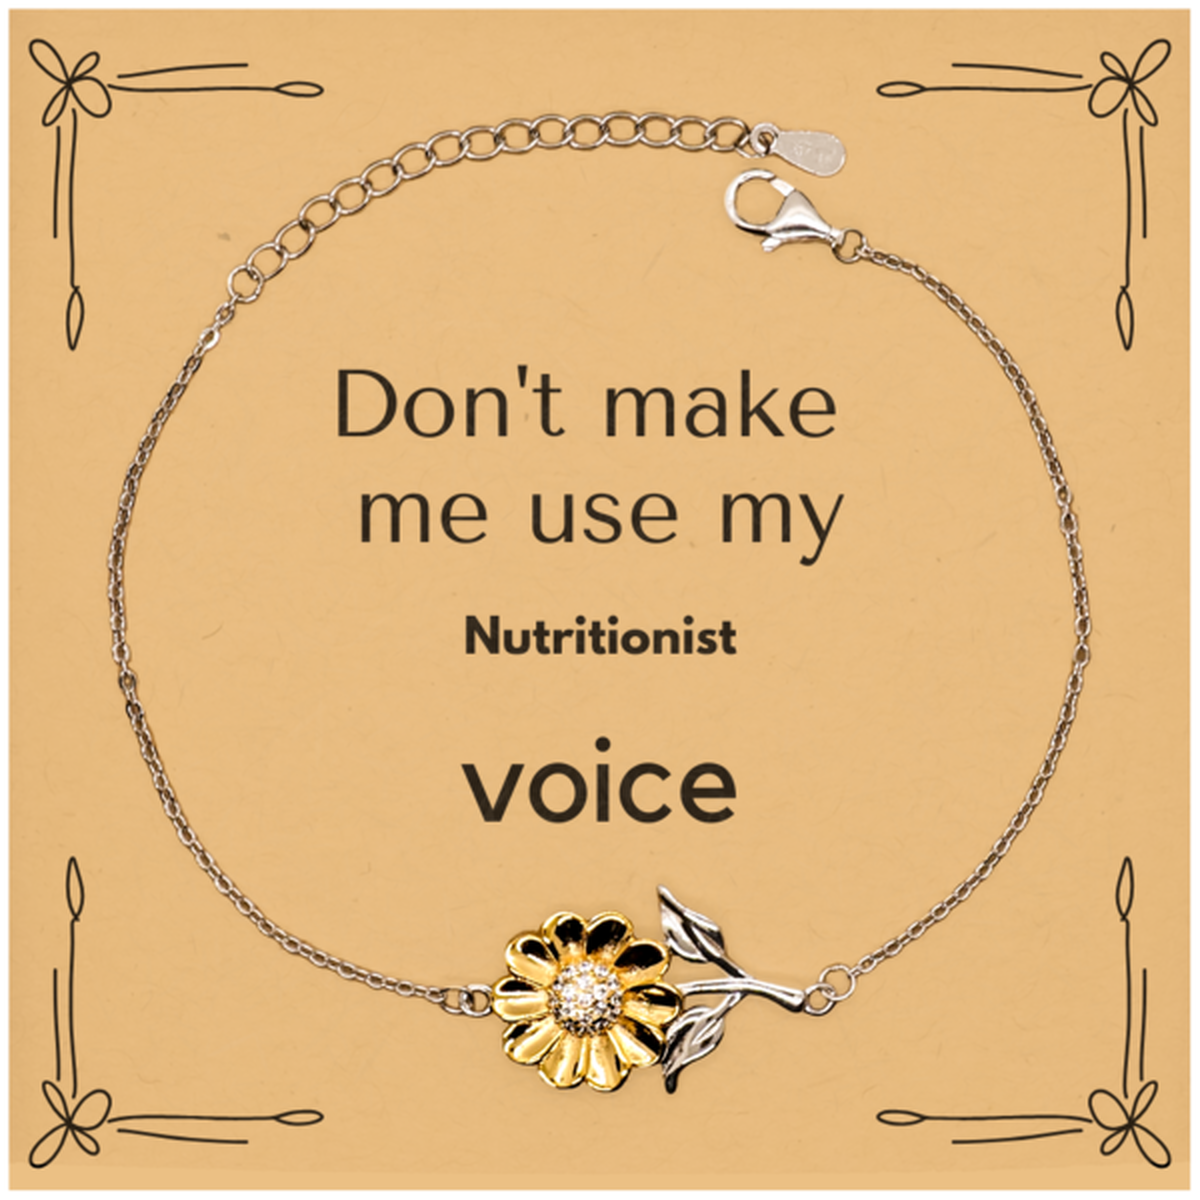 Don't make me use my Nutritionist voice, Sarcasm Nutritionist Card Gifts, Christmas Nutritionist Sunflower Bracelet Birthday Unique Gifts For Nutritionist Coworkers, Men, Women, Colleague, Friends